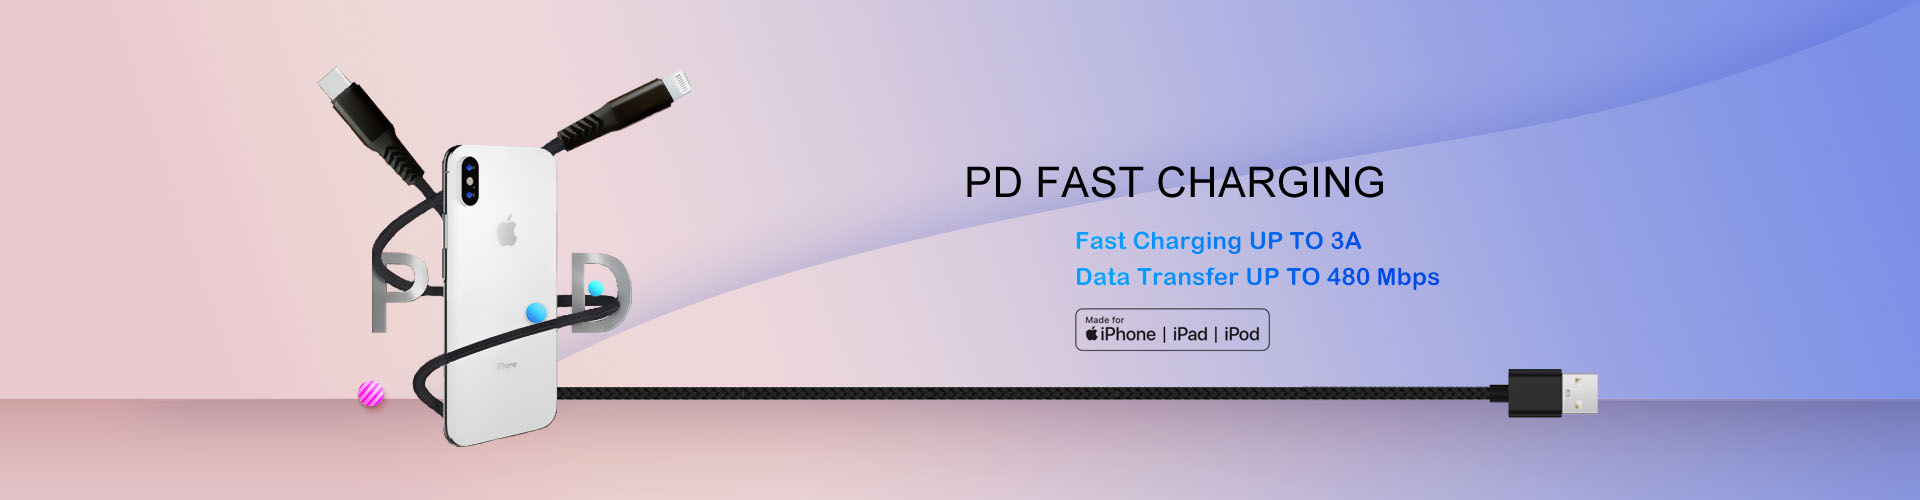 PD Charging